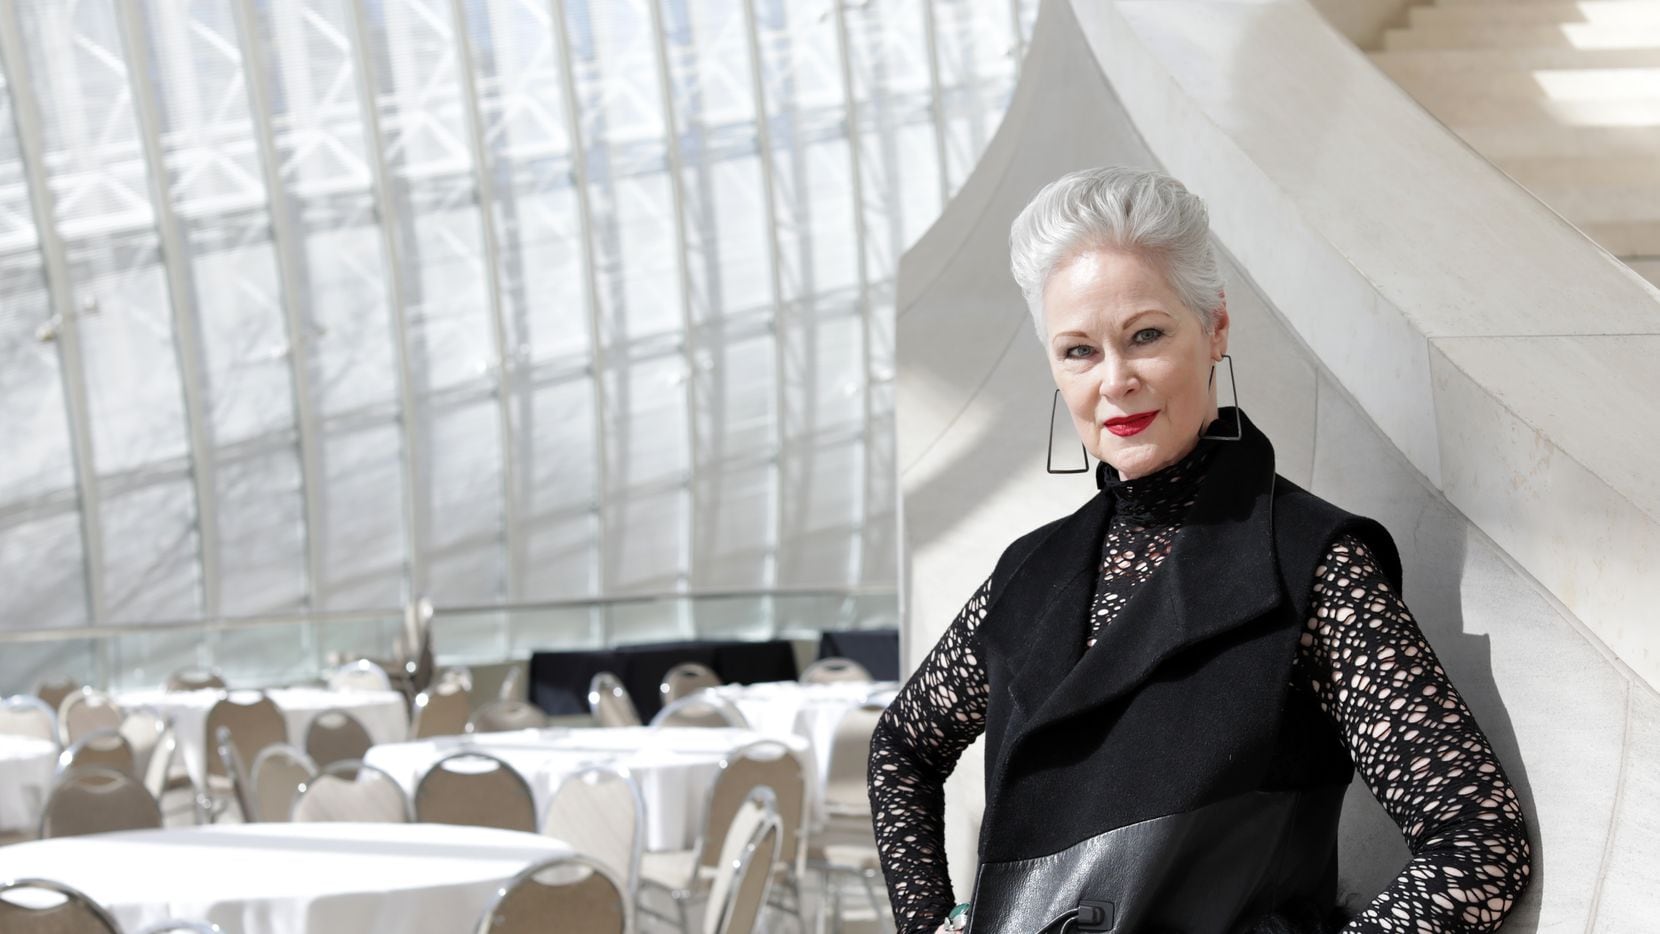 Jan Strimple, 67, had retired from modeling and turned her focus to producing fashion shows....